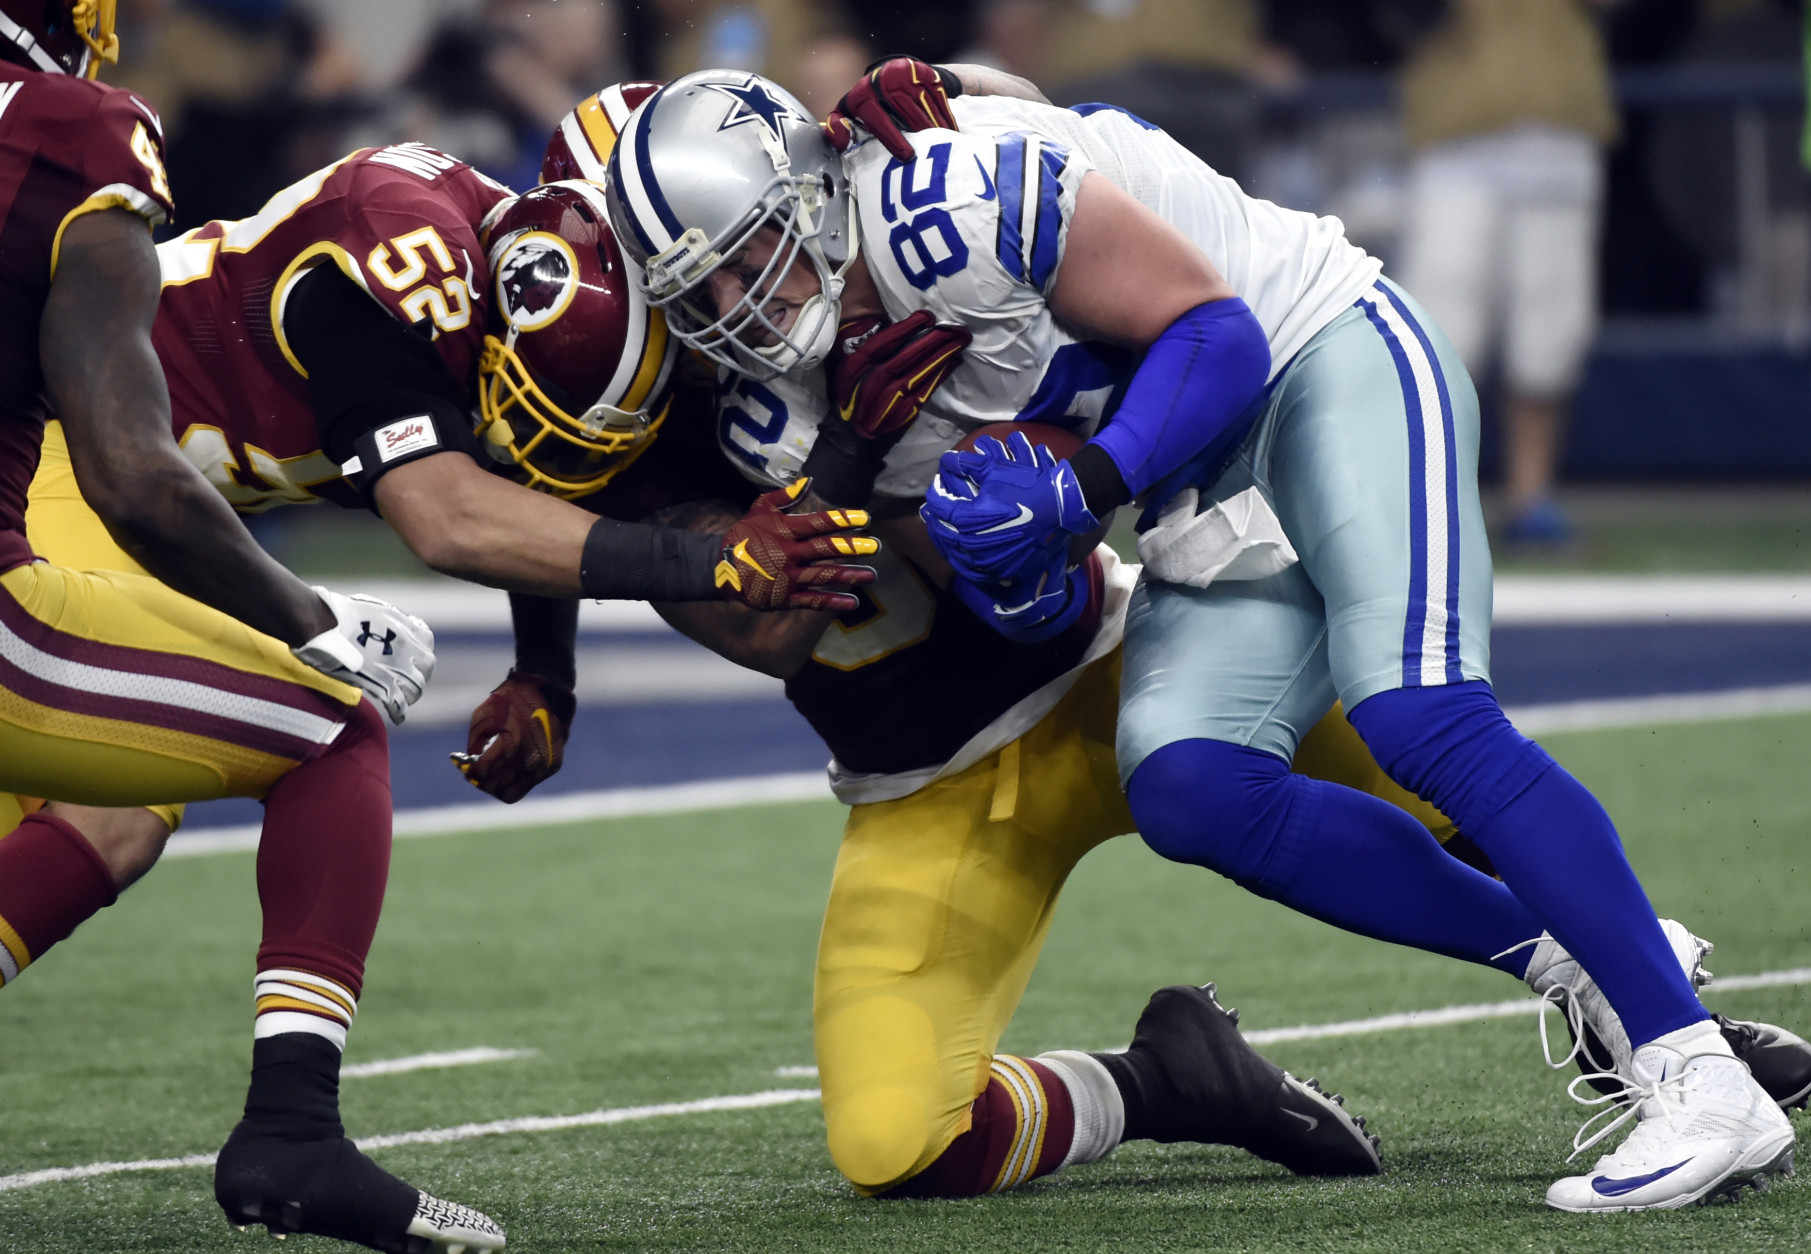 Washington Redskins' Keenan Robinson (52) and Mason Foster, rear, combine to stop Dallas Cowboys' Jason Witten (82) as Witten fights for extra yardage after making a catch in the first half of an NFL football game, Sunday, Jan. 3, 2016, in Arlington, Texas. (AP Photo/Michael Ainsworth)